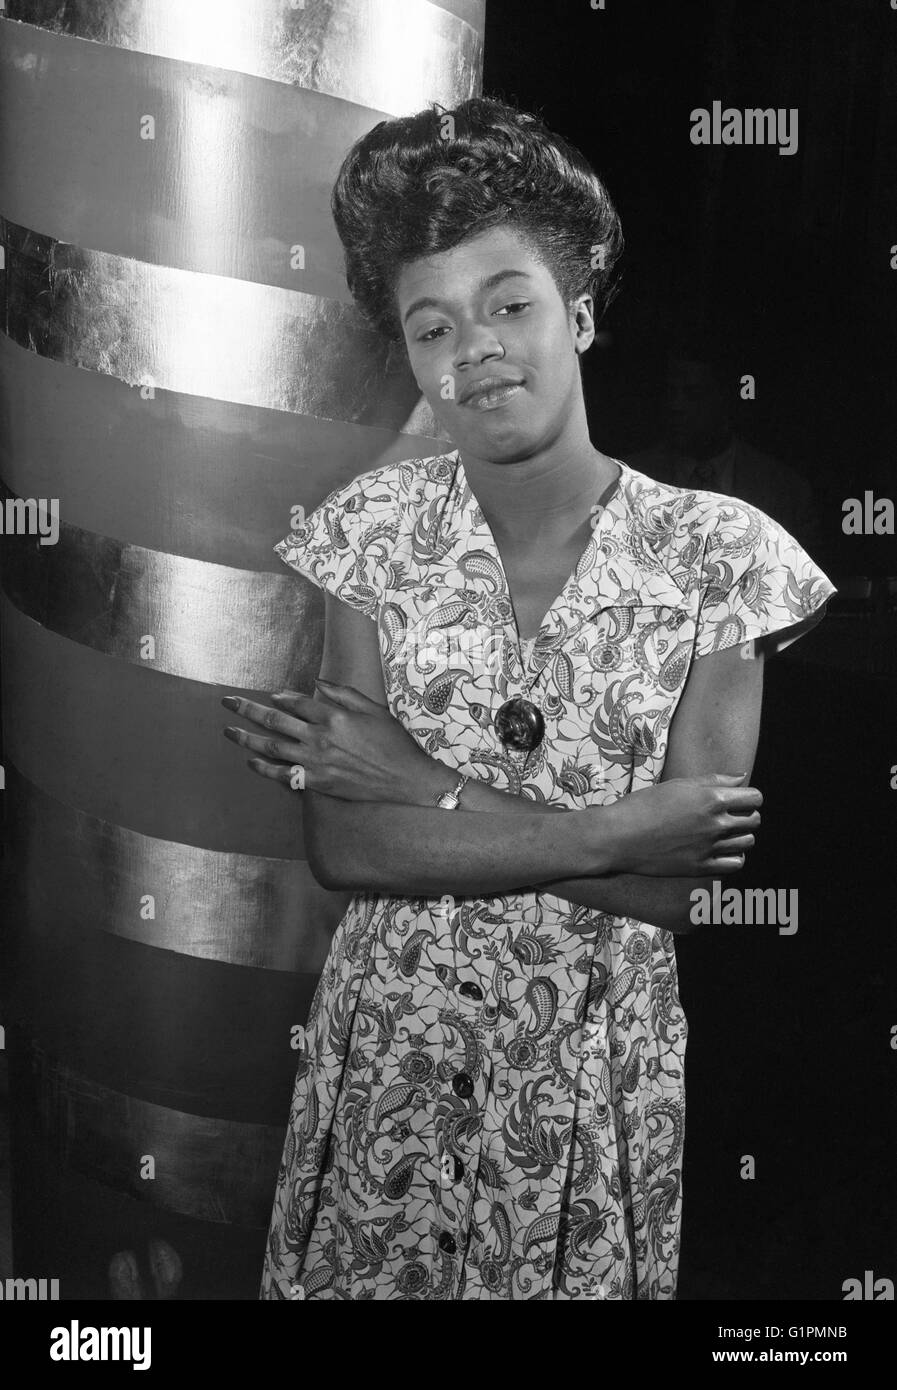 SARAH VAUGHAN (1924-1990).  American singer. At the Cafe Society in New York City. Photograph by William P. Gottlieb, 1946. Stock Photo